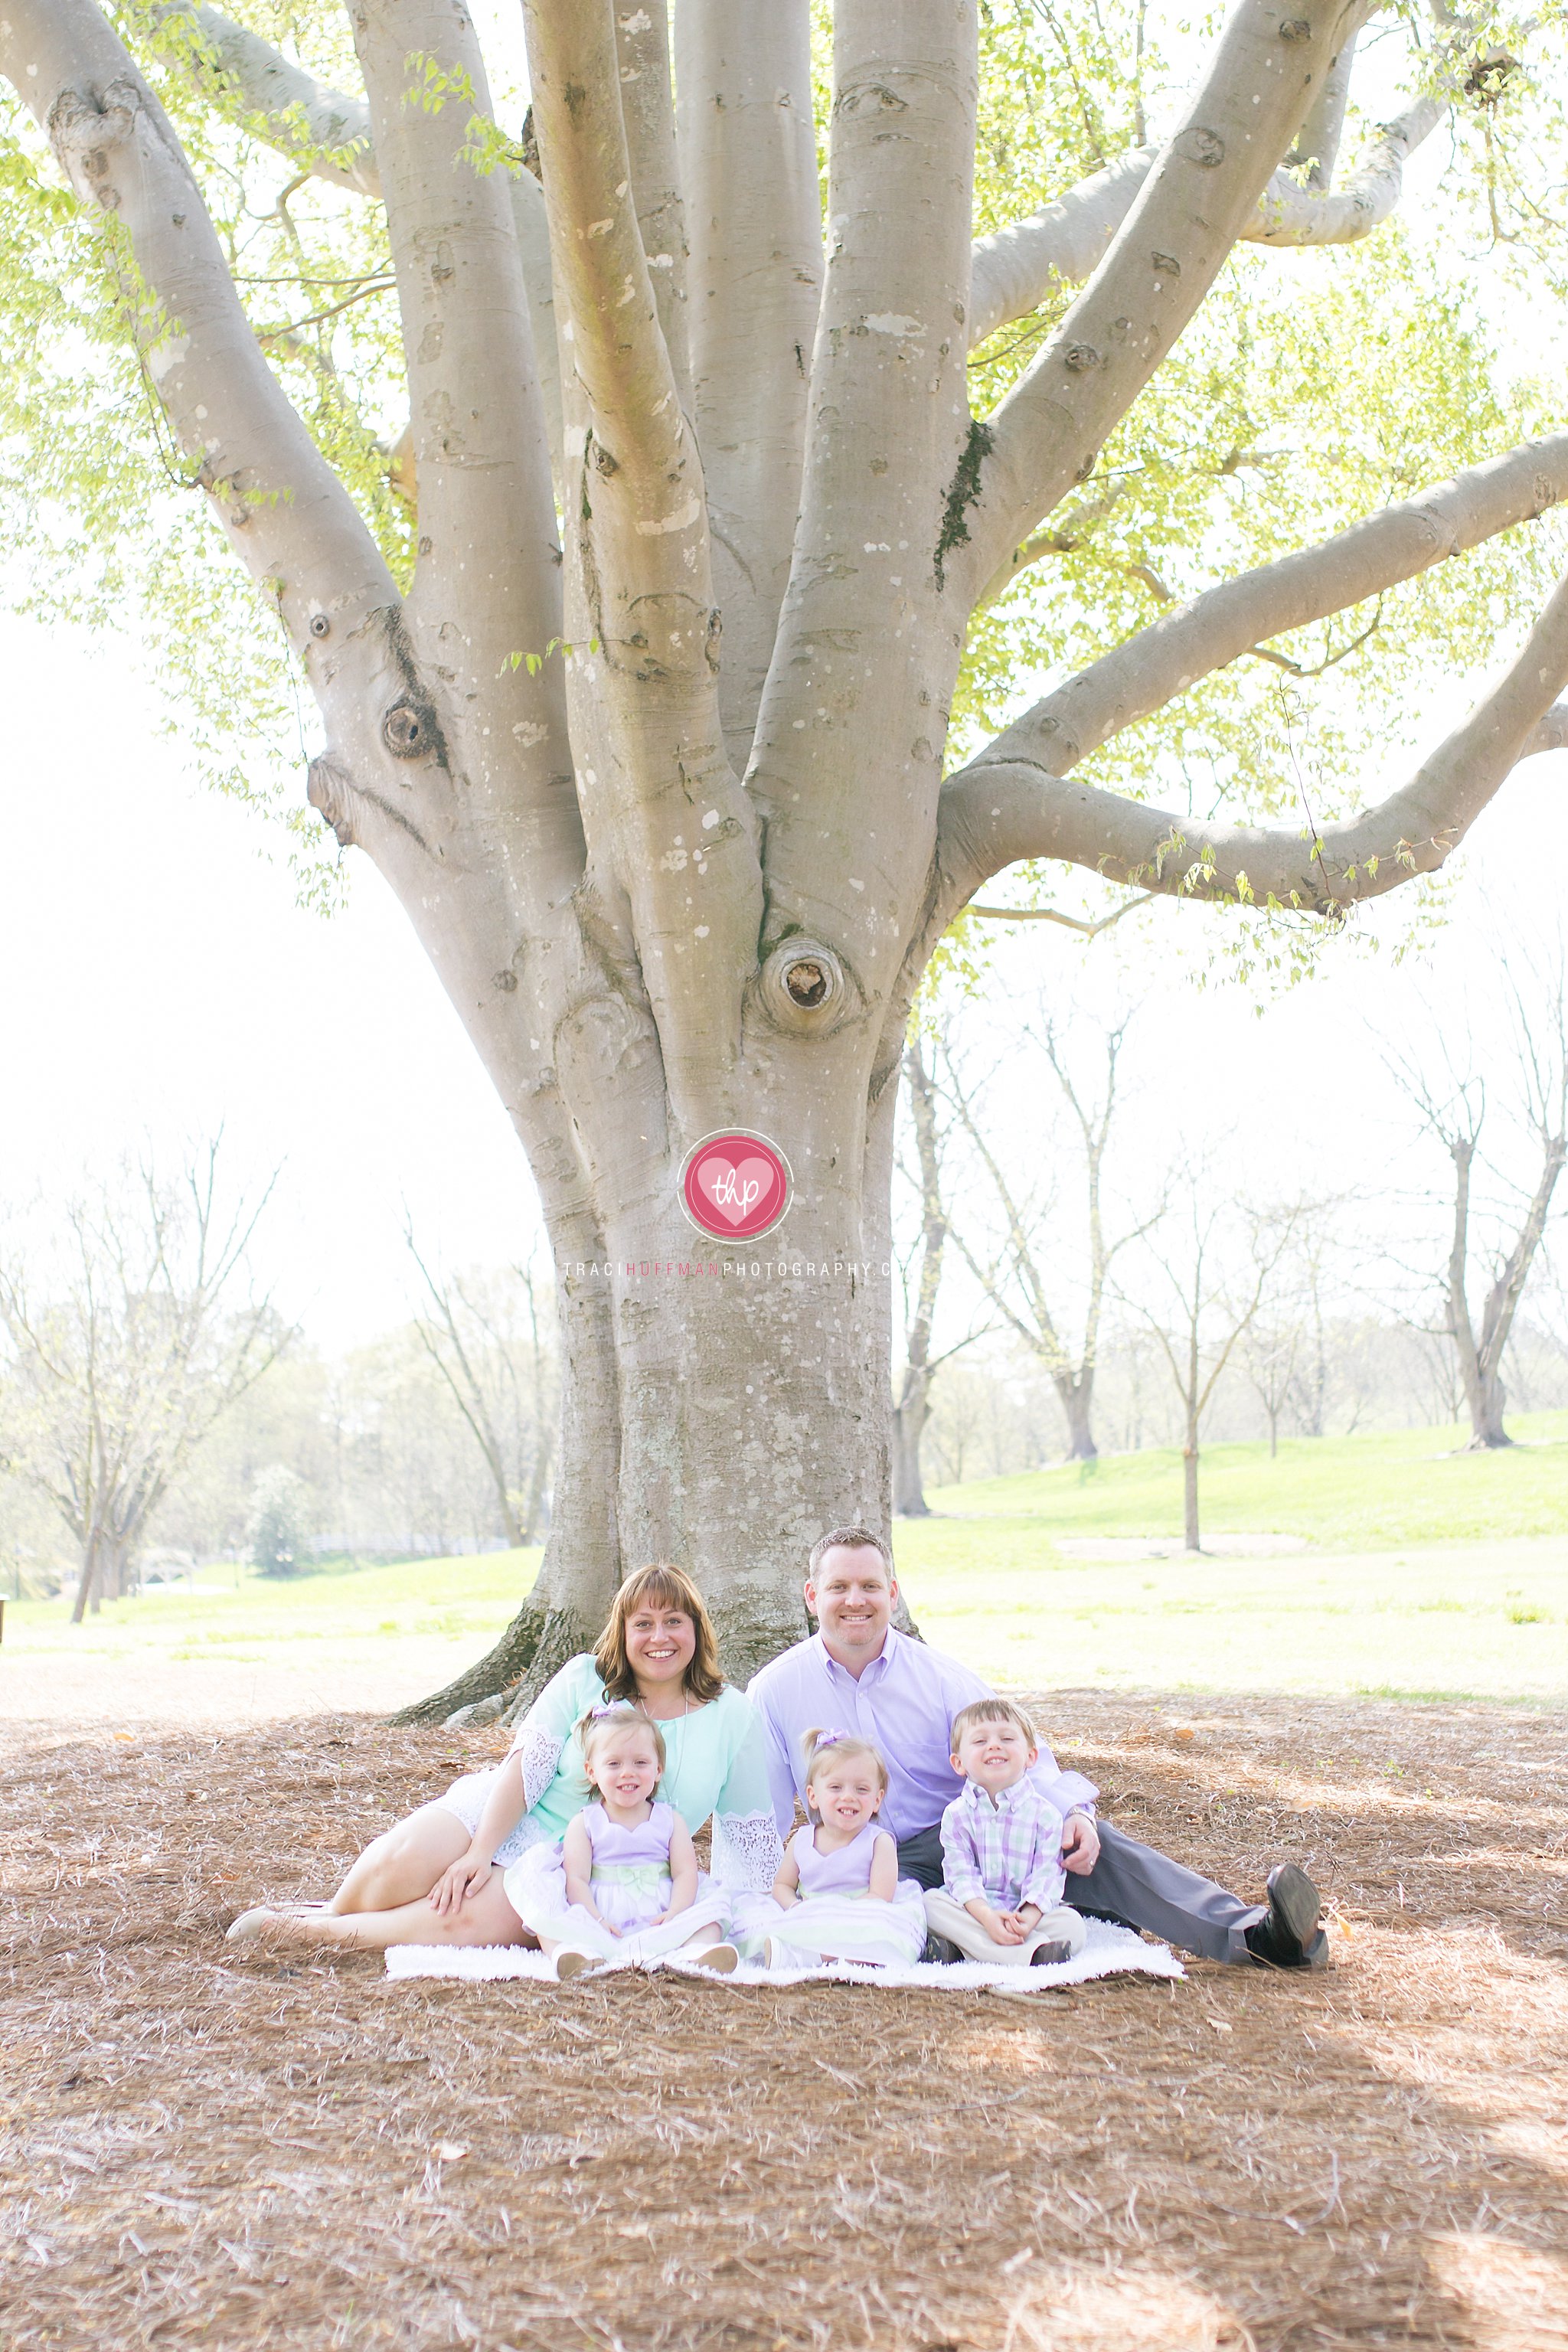 Family Photography Session at Oak View Park in Raleigh NC with the Pfeifer Family.